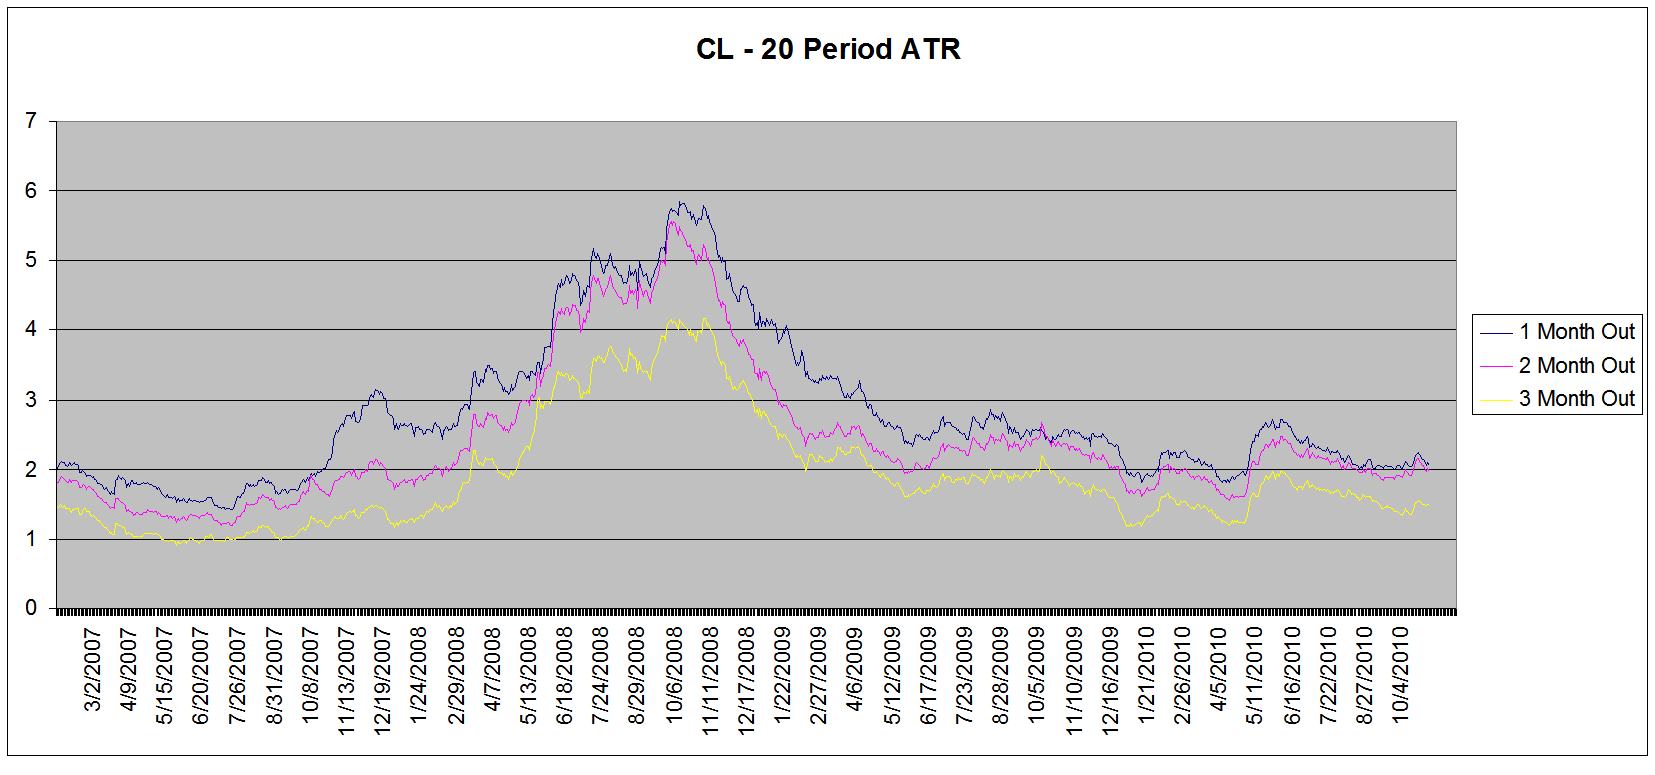 ATR for back adjusted CL contracts 1, 2 and 3 months out.